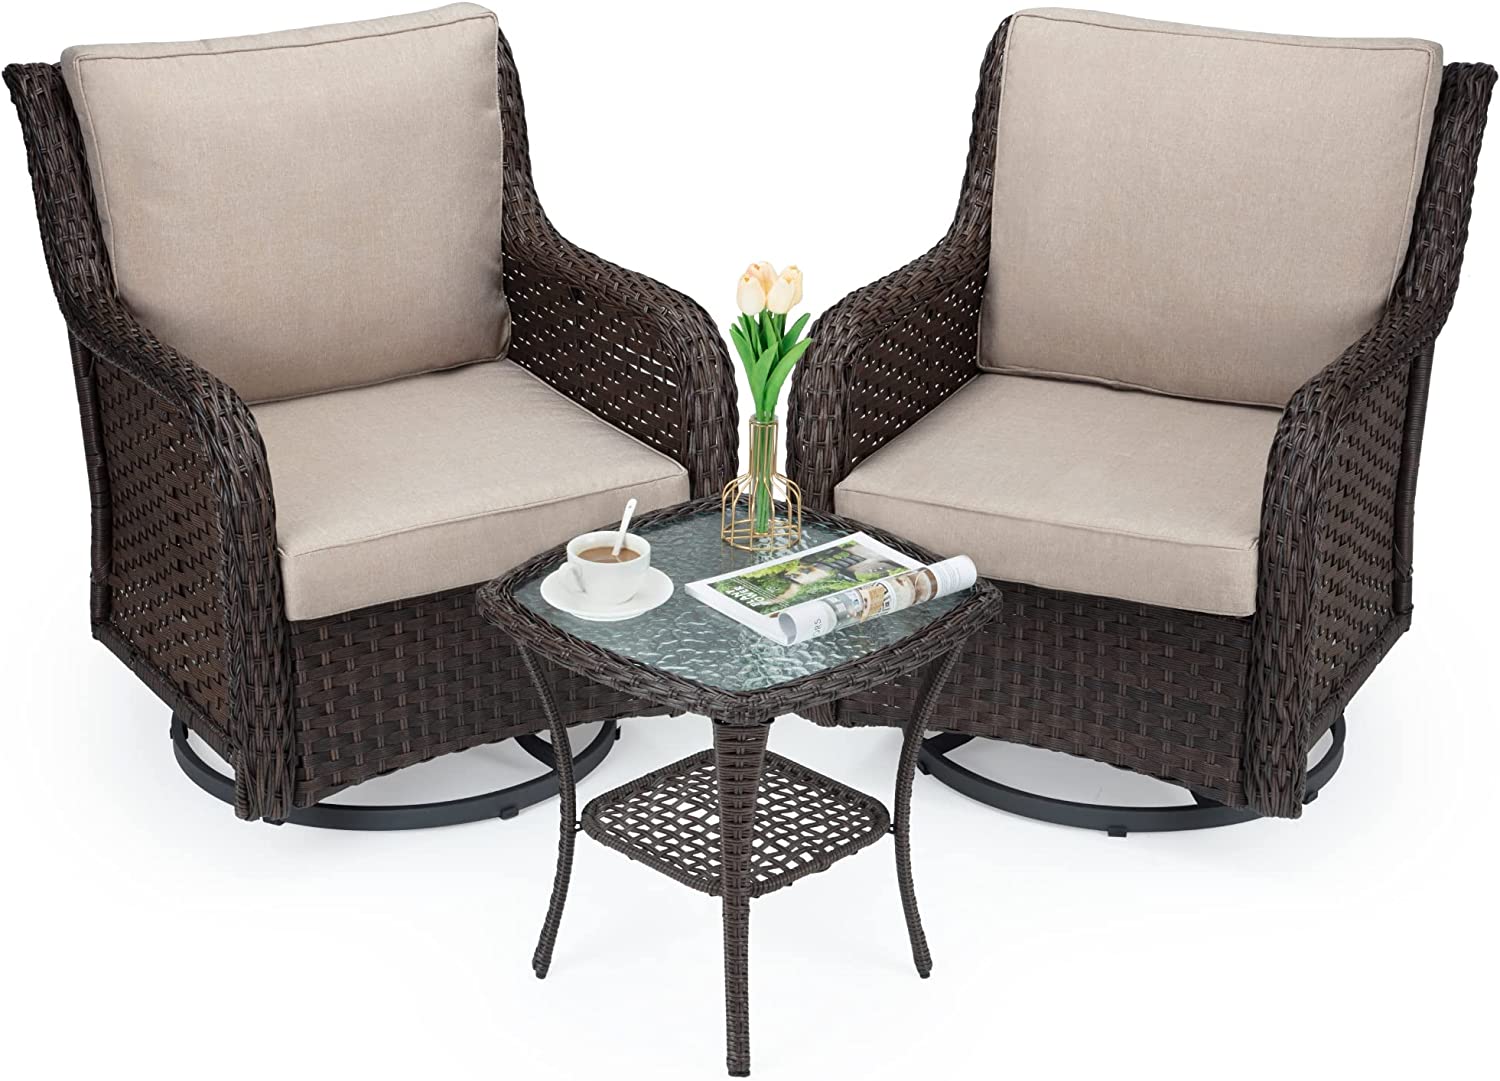 Outdoor 360° Swivel Rocker Patio Chairs Set of 2 and Matching End Table, IDEALHOUSE 3 Pieces Wicker Patio Bistro Set with Premium Fabric Cushions for Yard, Garden, Balcony (Beige, Encryption Rattan) - image 1 of 7